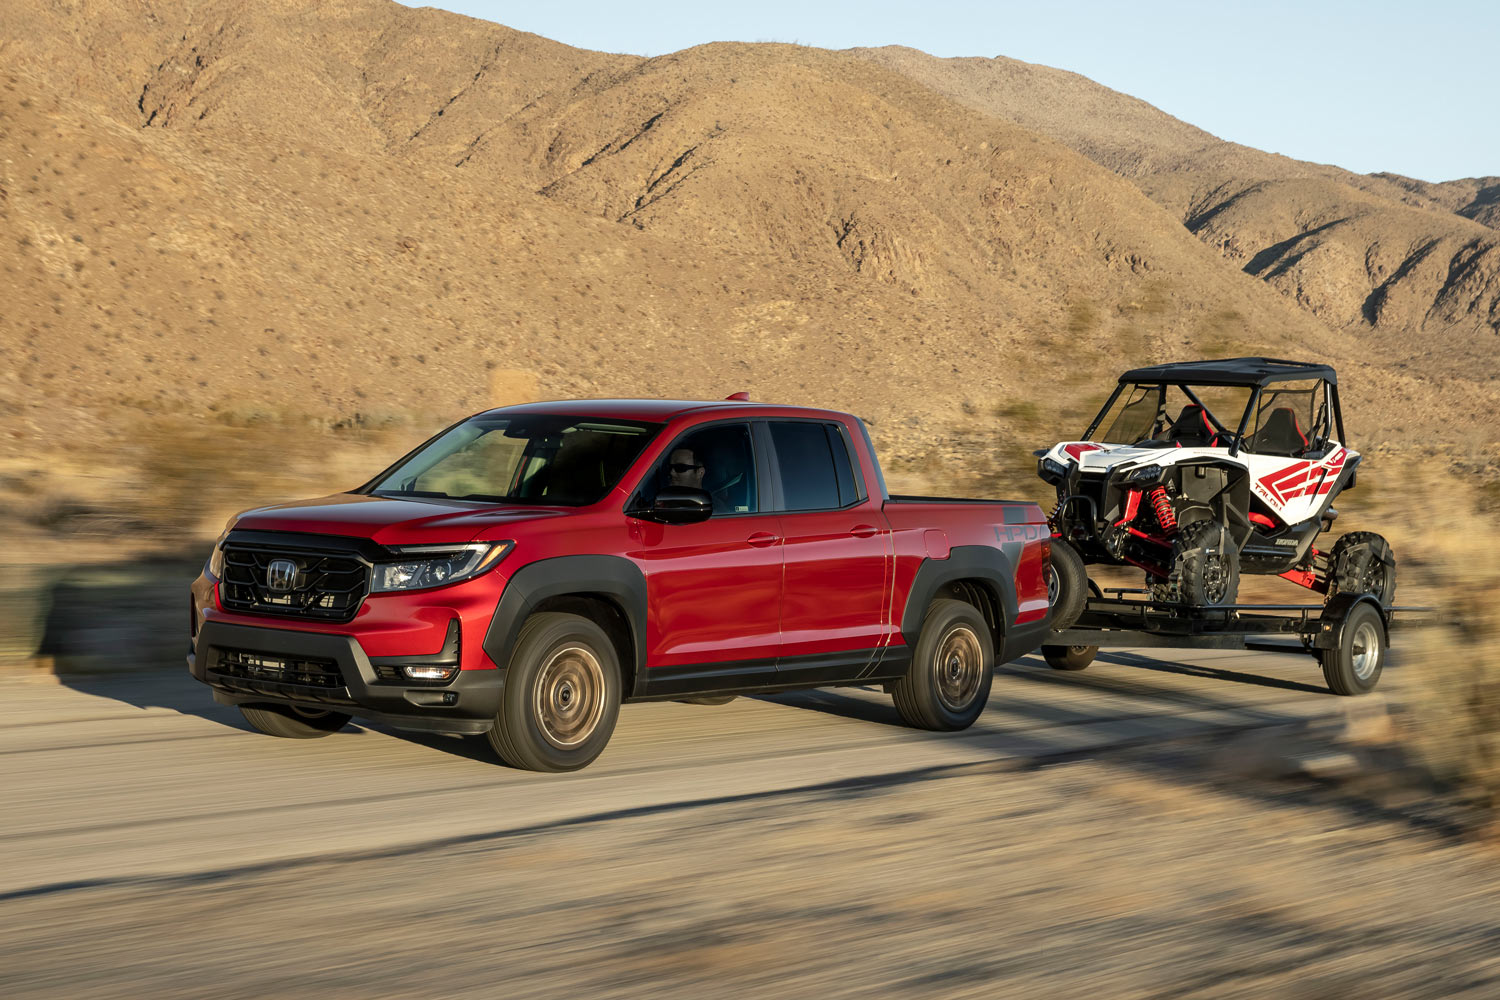 2023 Honda Ridgeline in red towing an off-road vehicle on a trailer down a dirt road